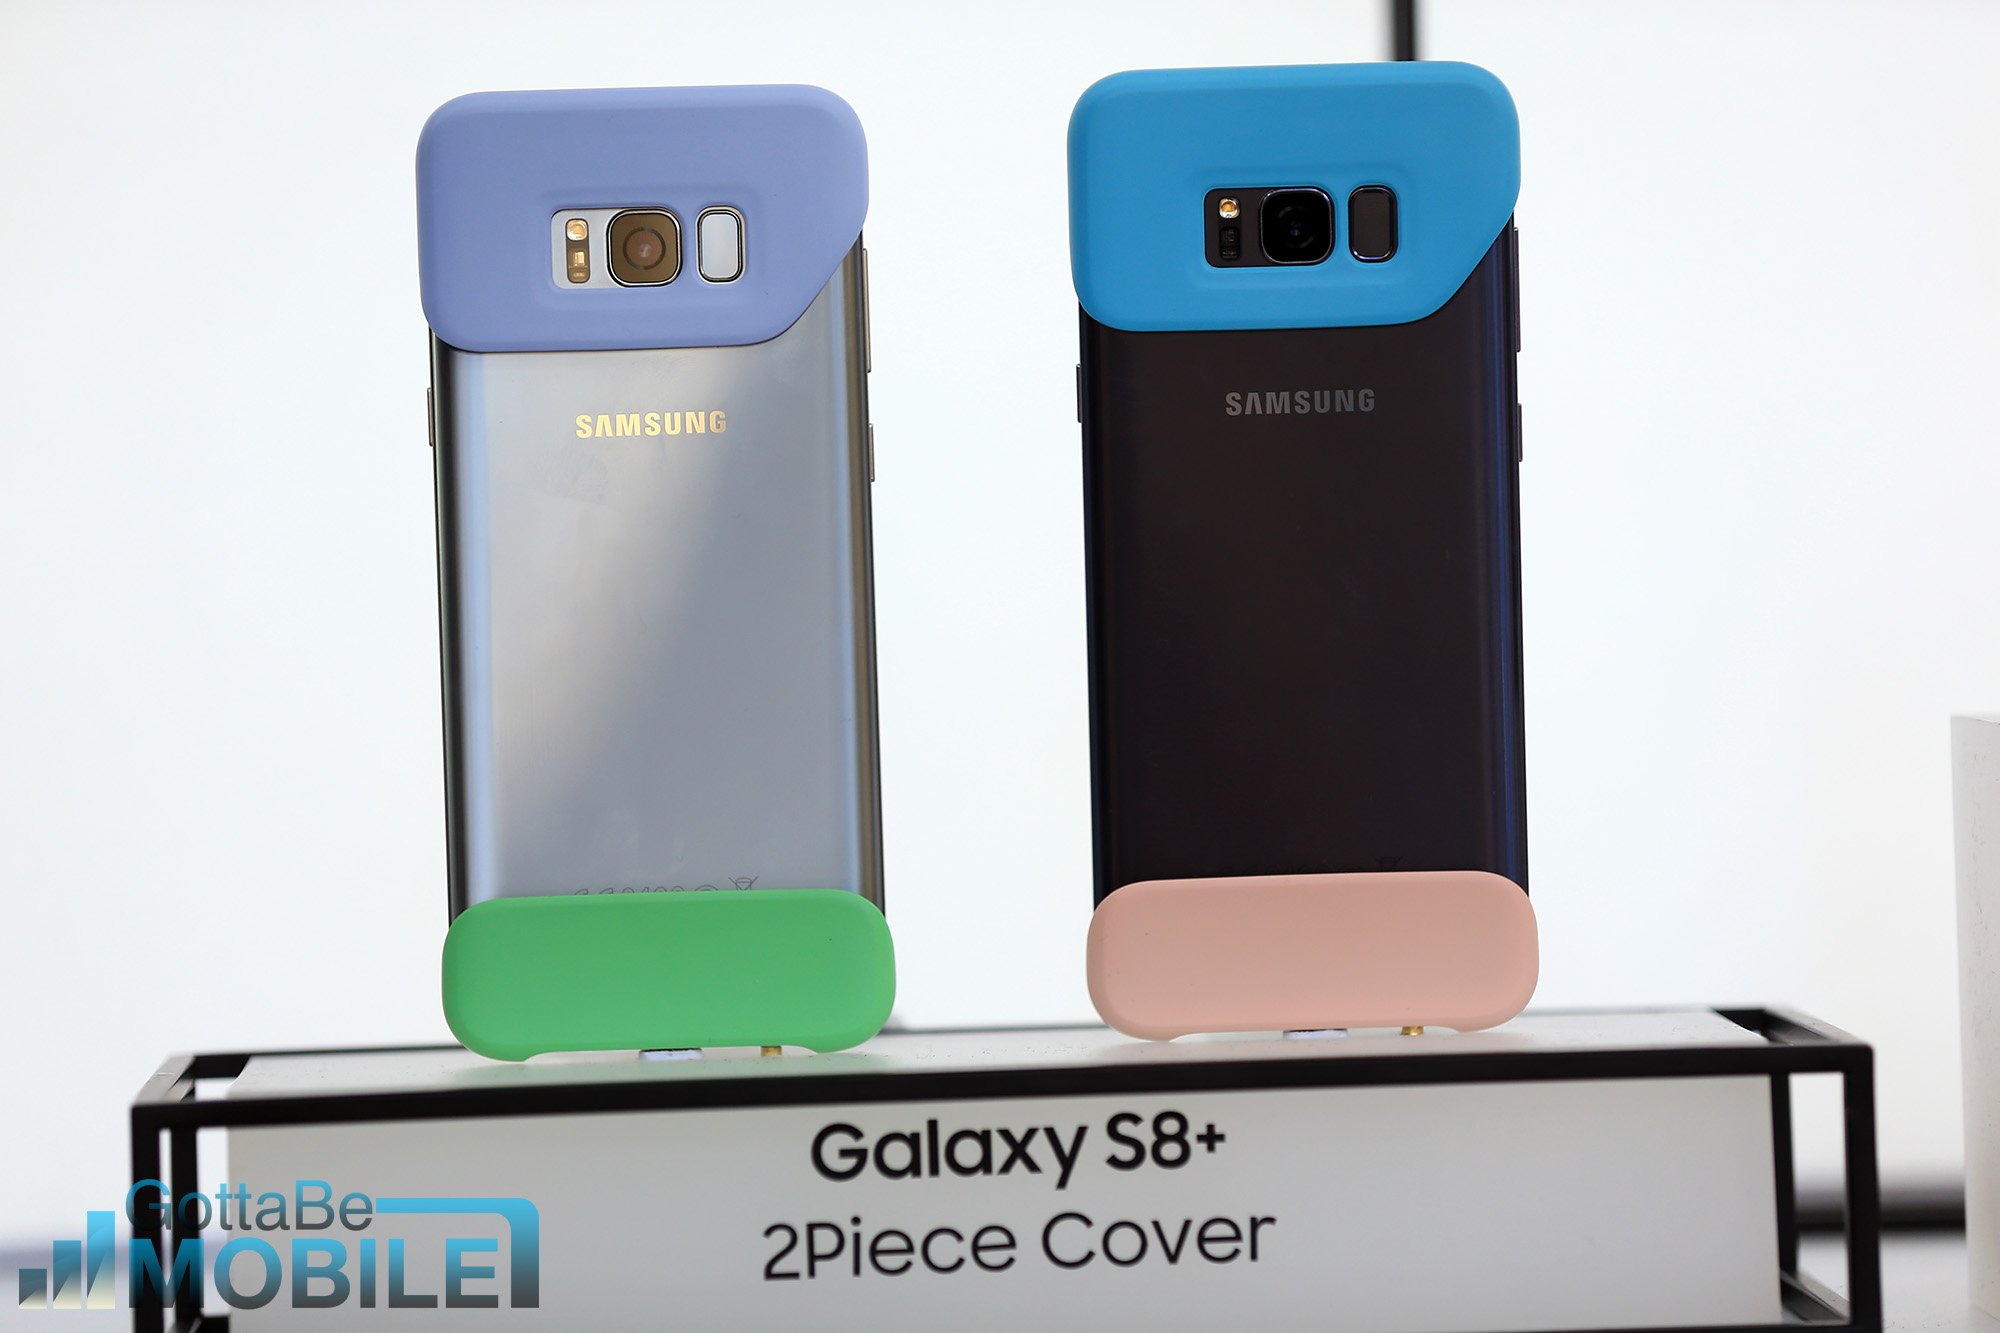 There are many Samsung Galaxy S8 cases and accessories already available. 